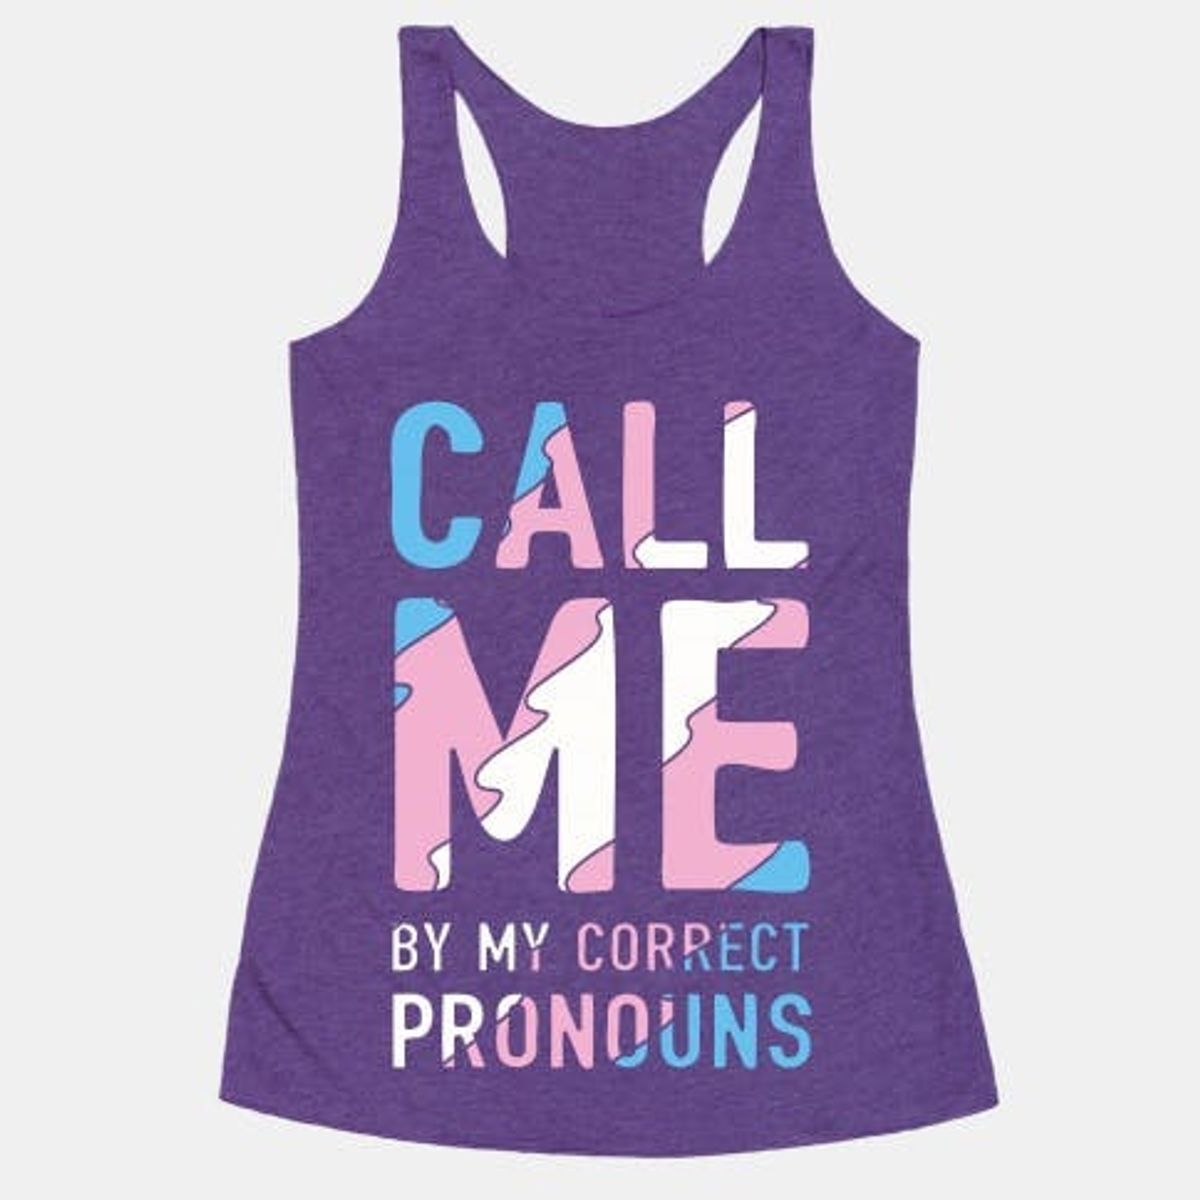 These Creative Statement Shirts Teach You What You Need to Know About Gender Pronouns